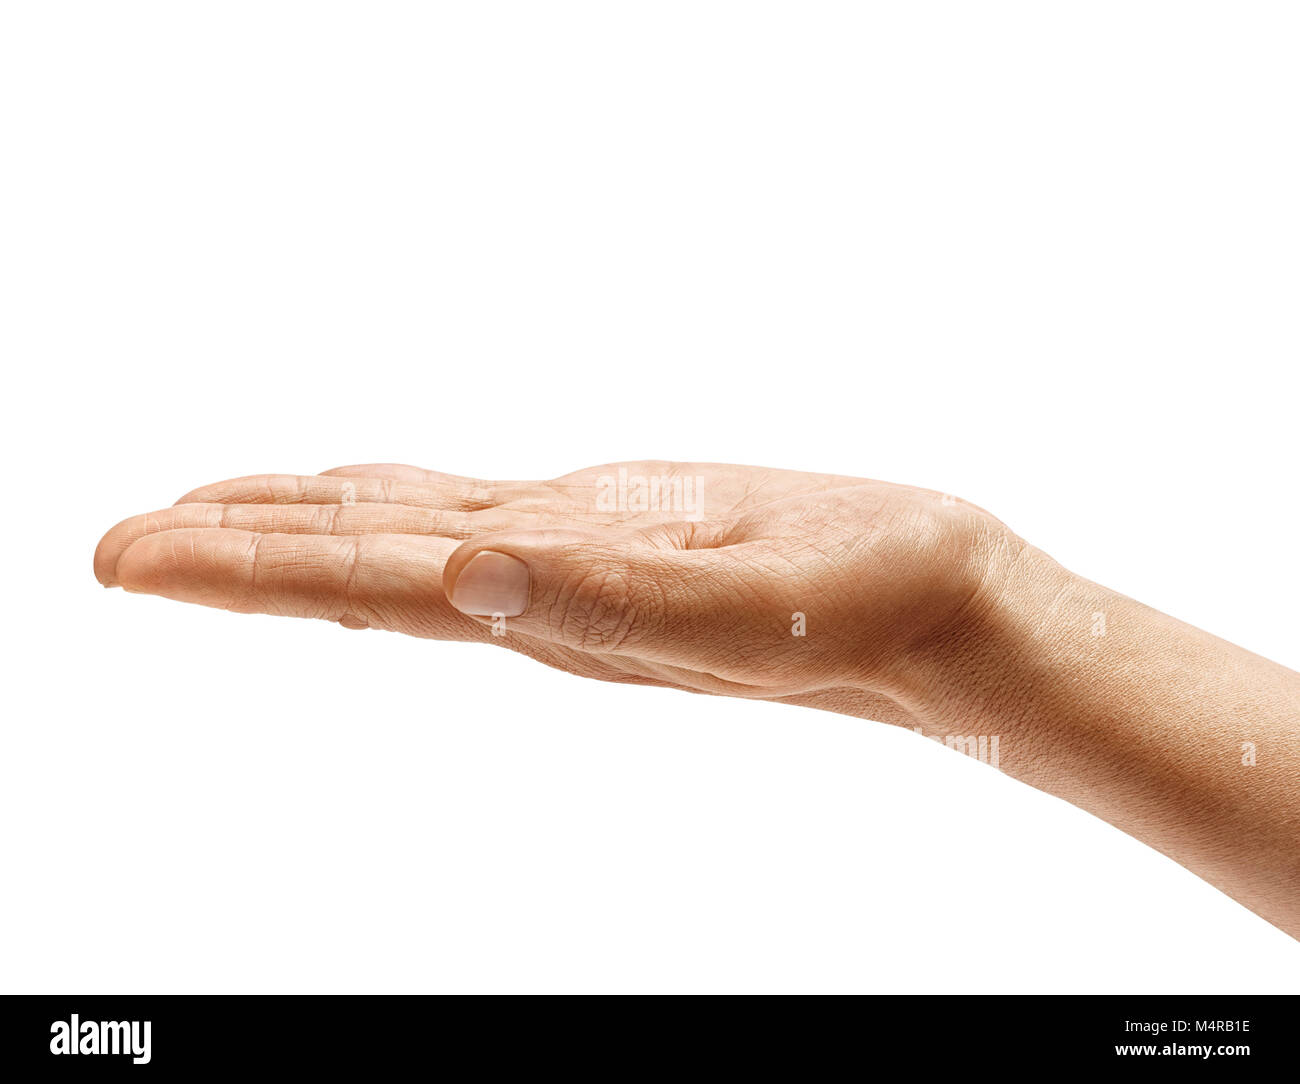 Man's hand holding open palm up isolated on white background. Palm up, close up. High resolution product Stock Photo